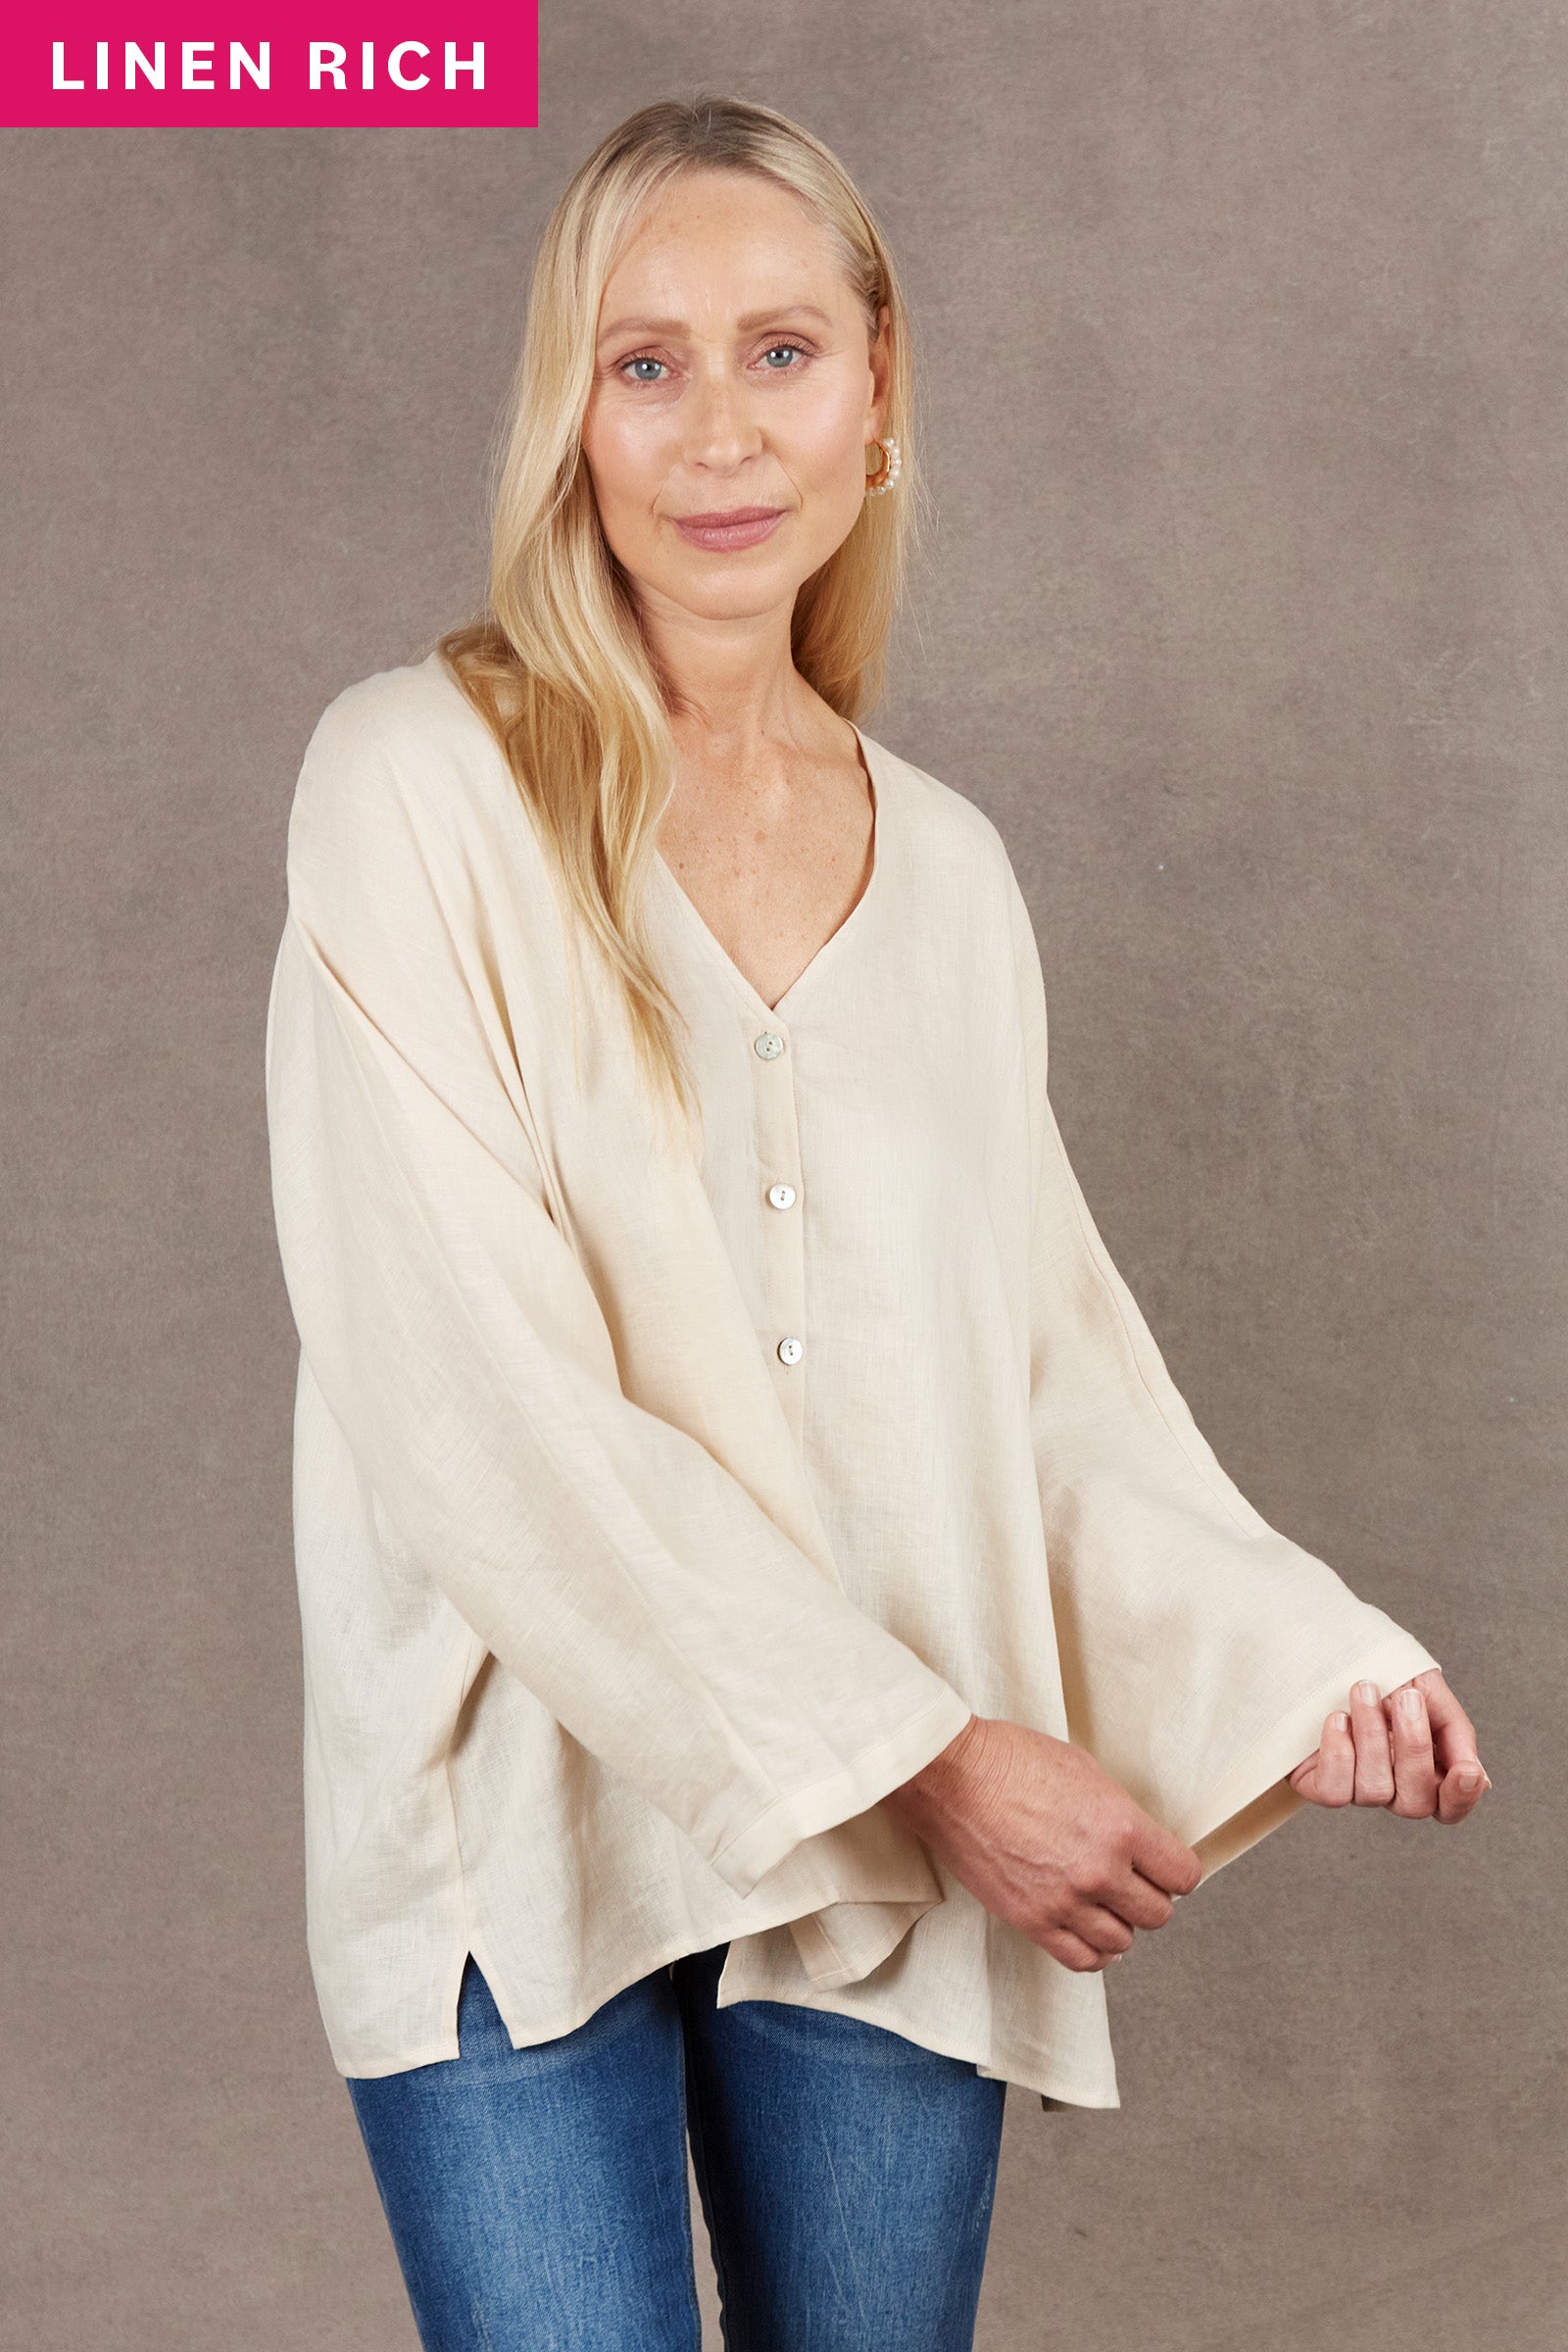 Nama Relax Top - Vanilla - eb&ive Clothing - Top L/S Linen One Size